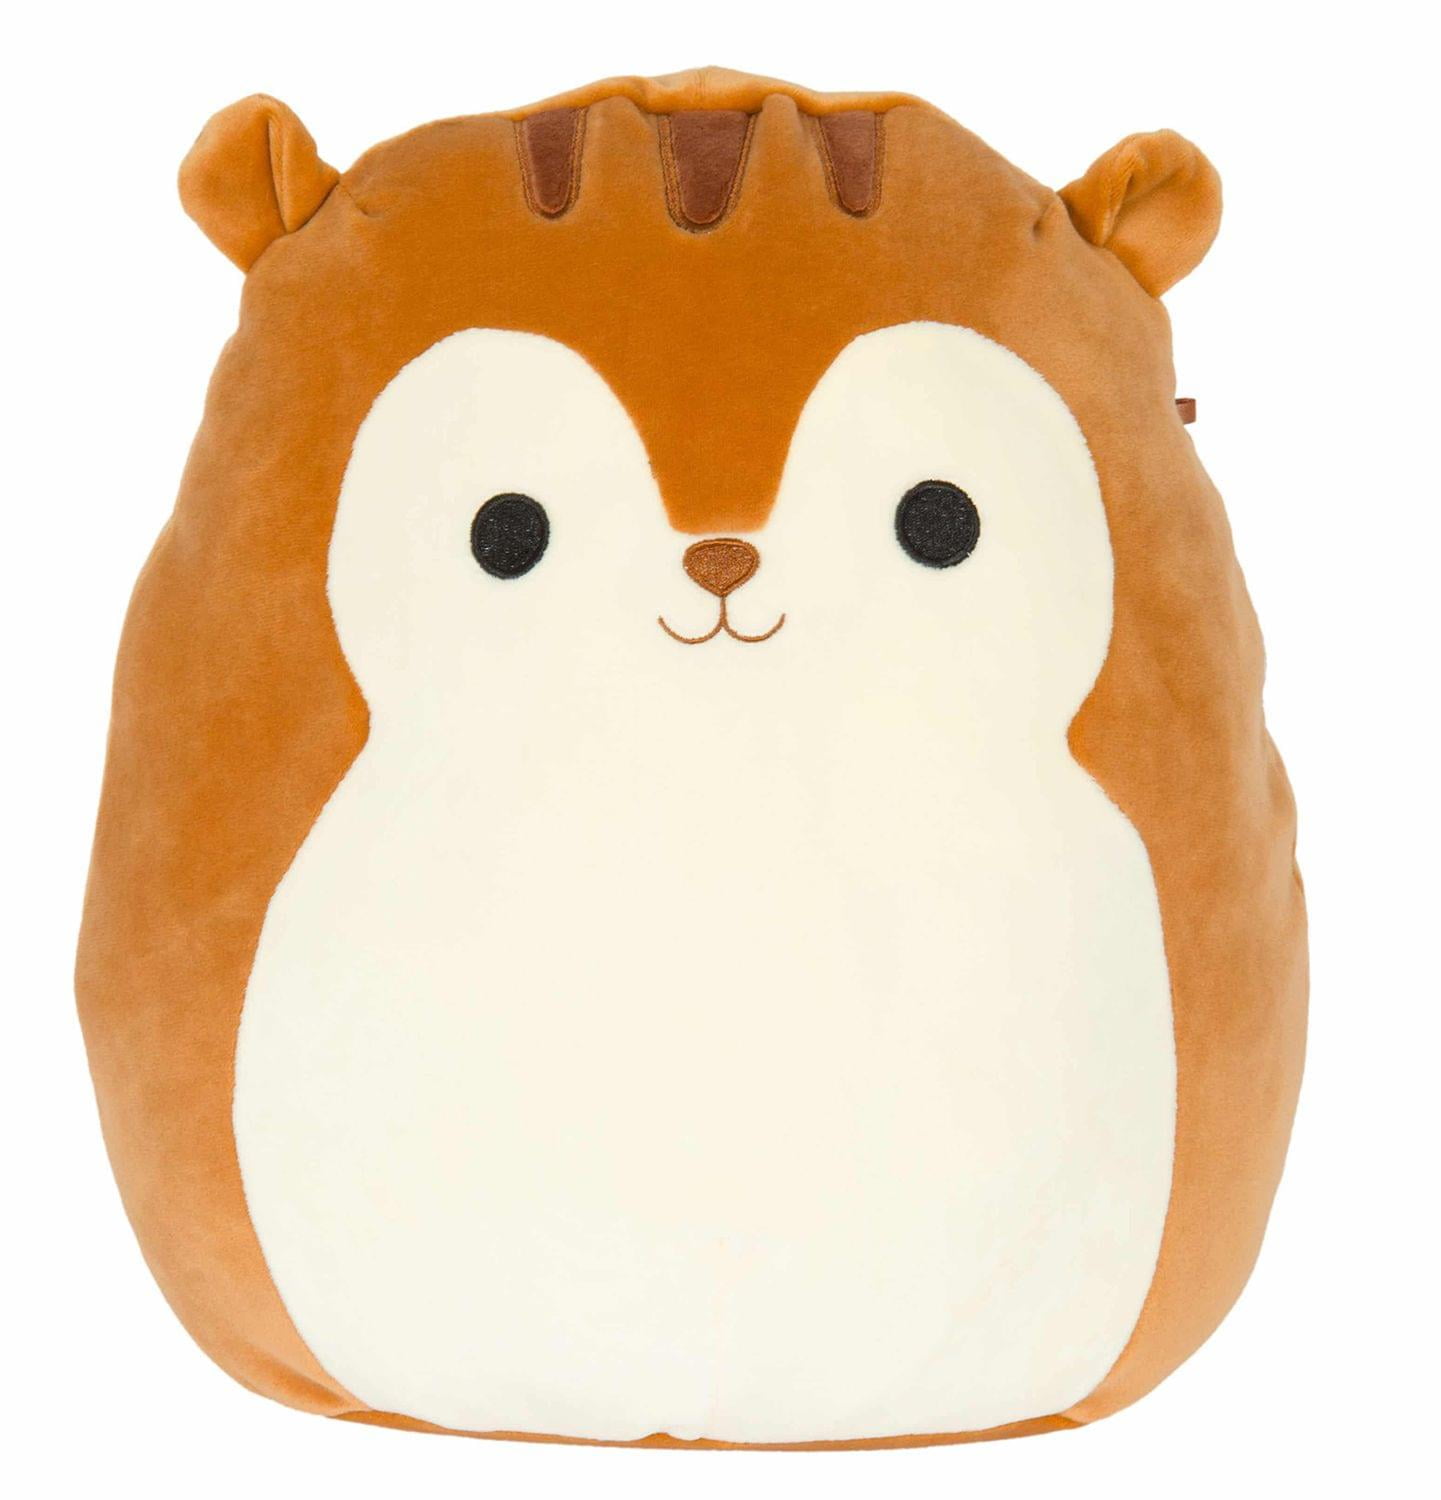 Squishmallows 8" Sawyer the Squirrel Brown Plush Pillow NEW w/ tags!